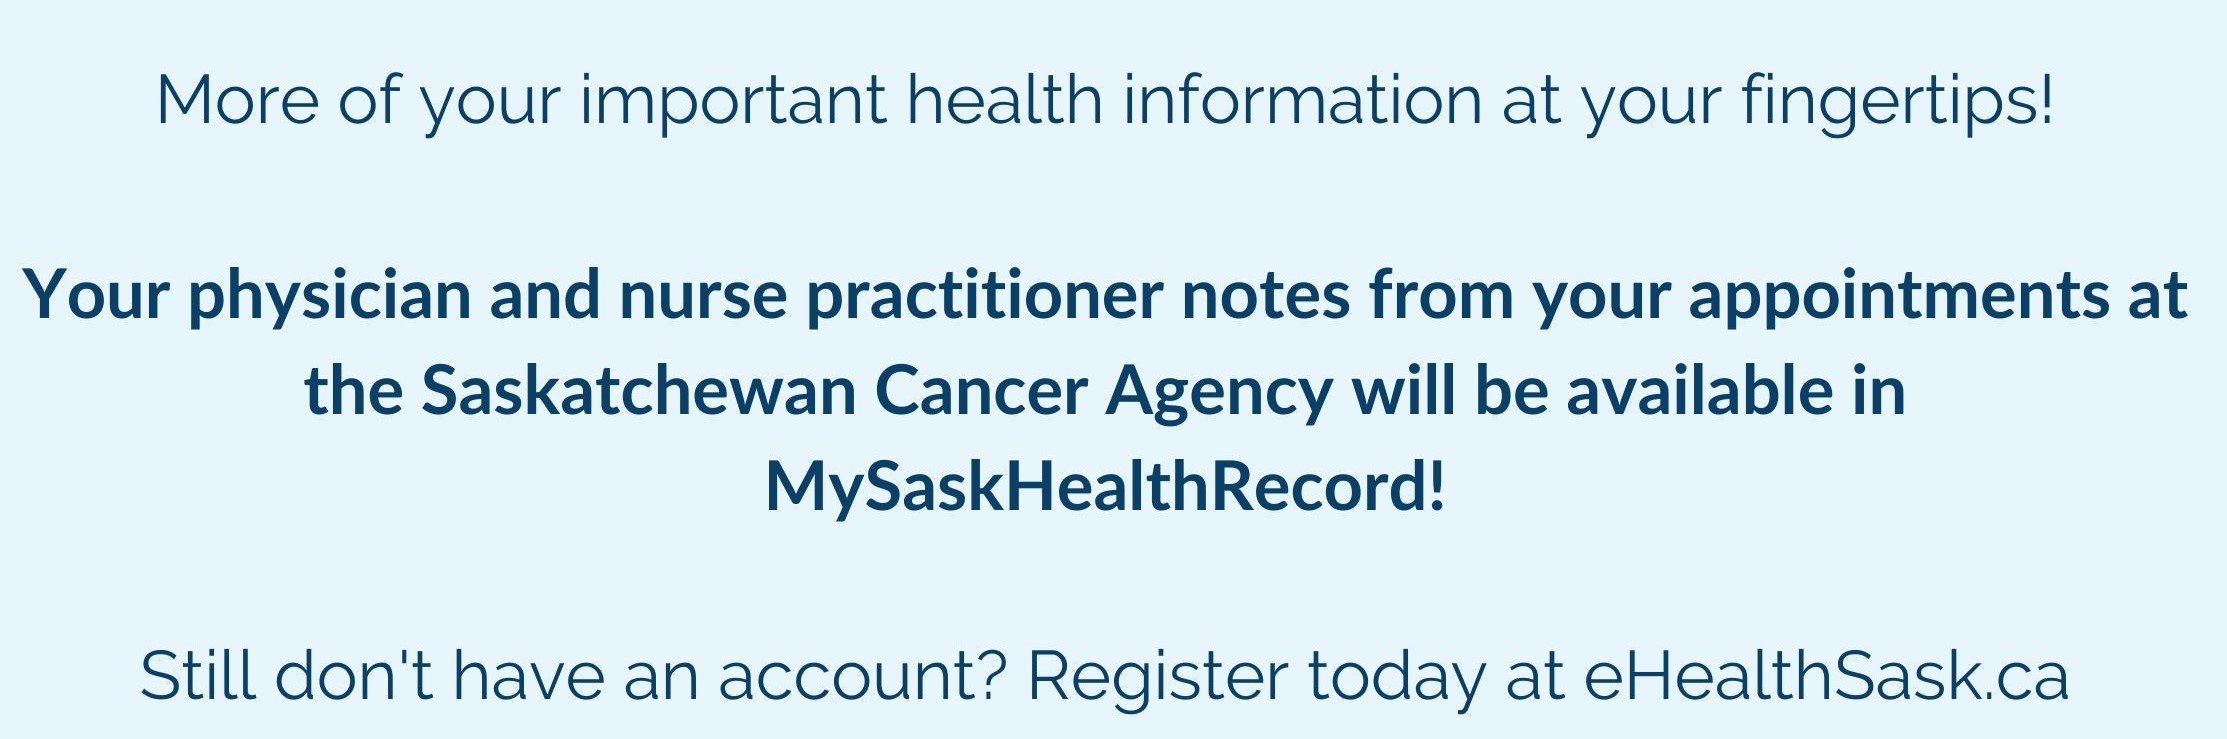 new banner for my sask health record page cropped